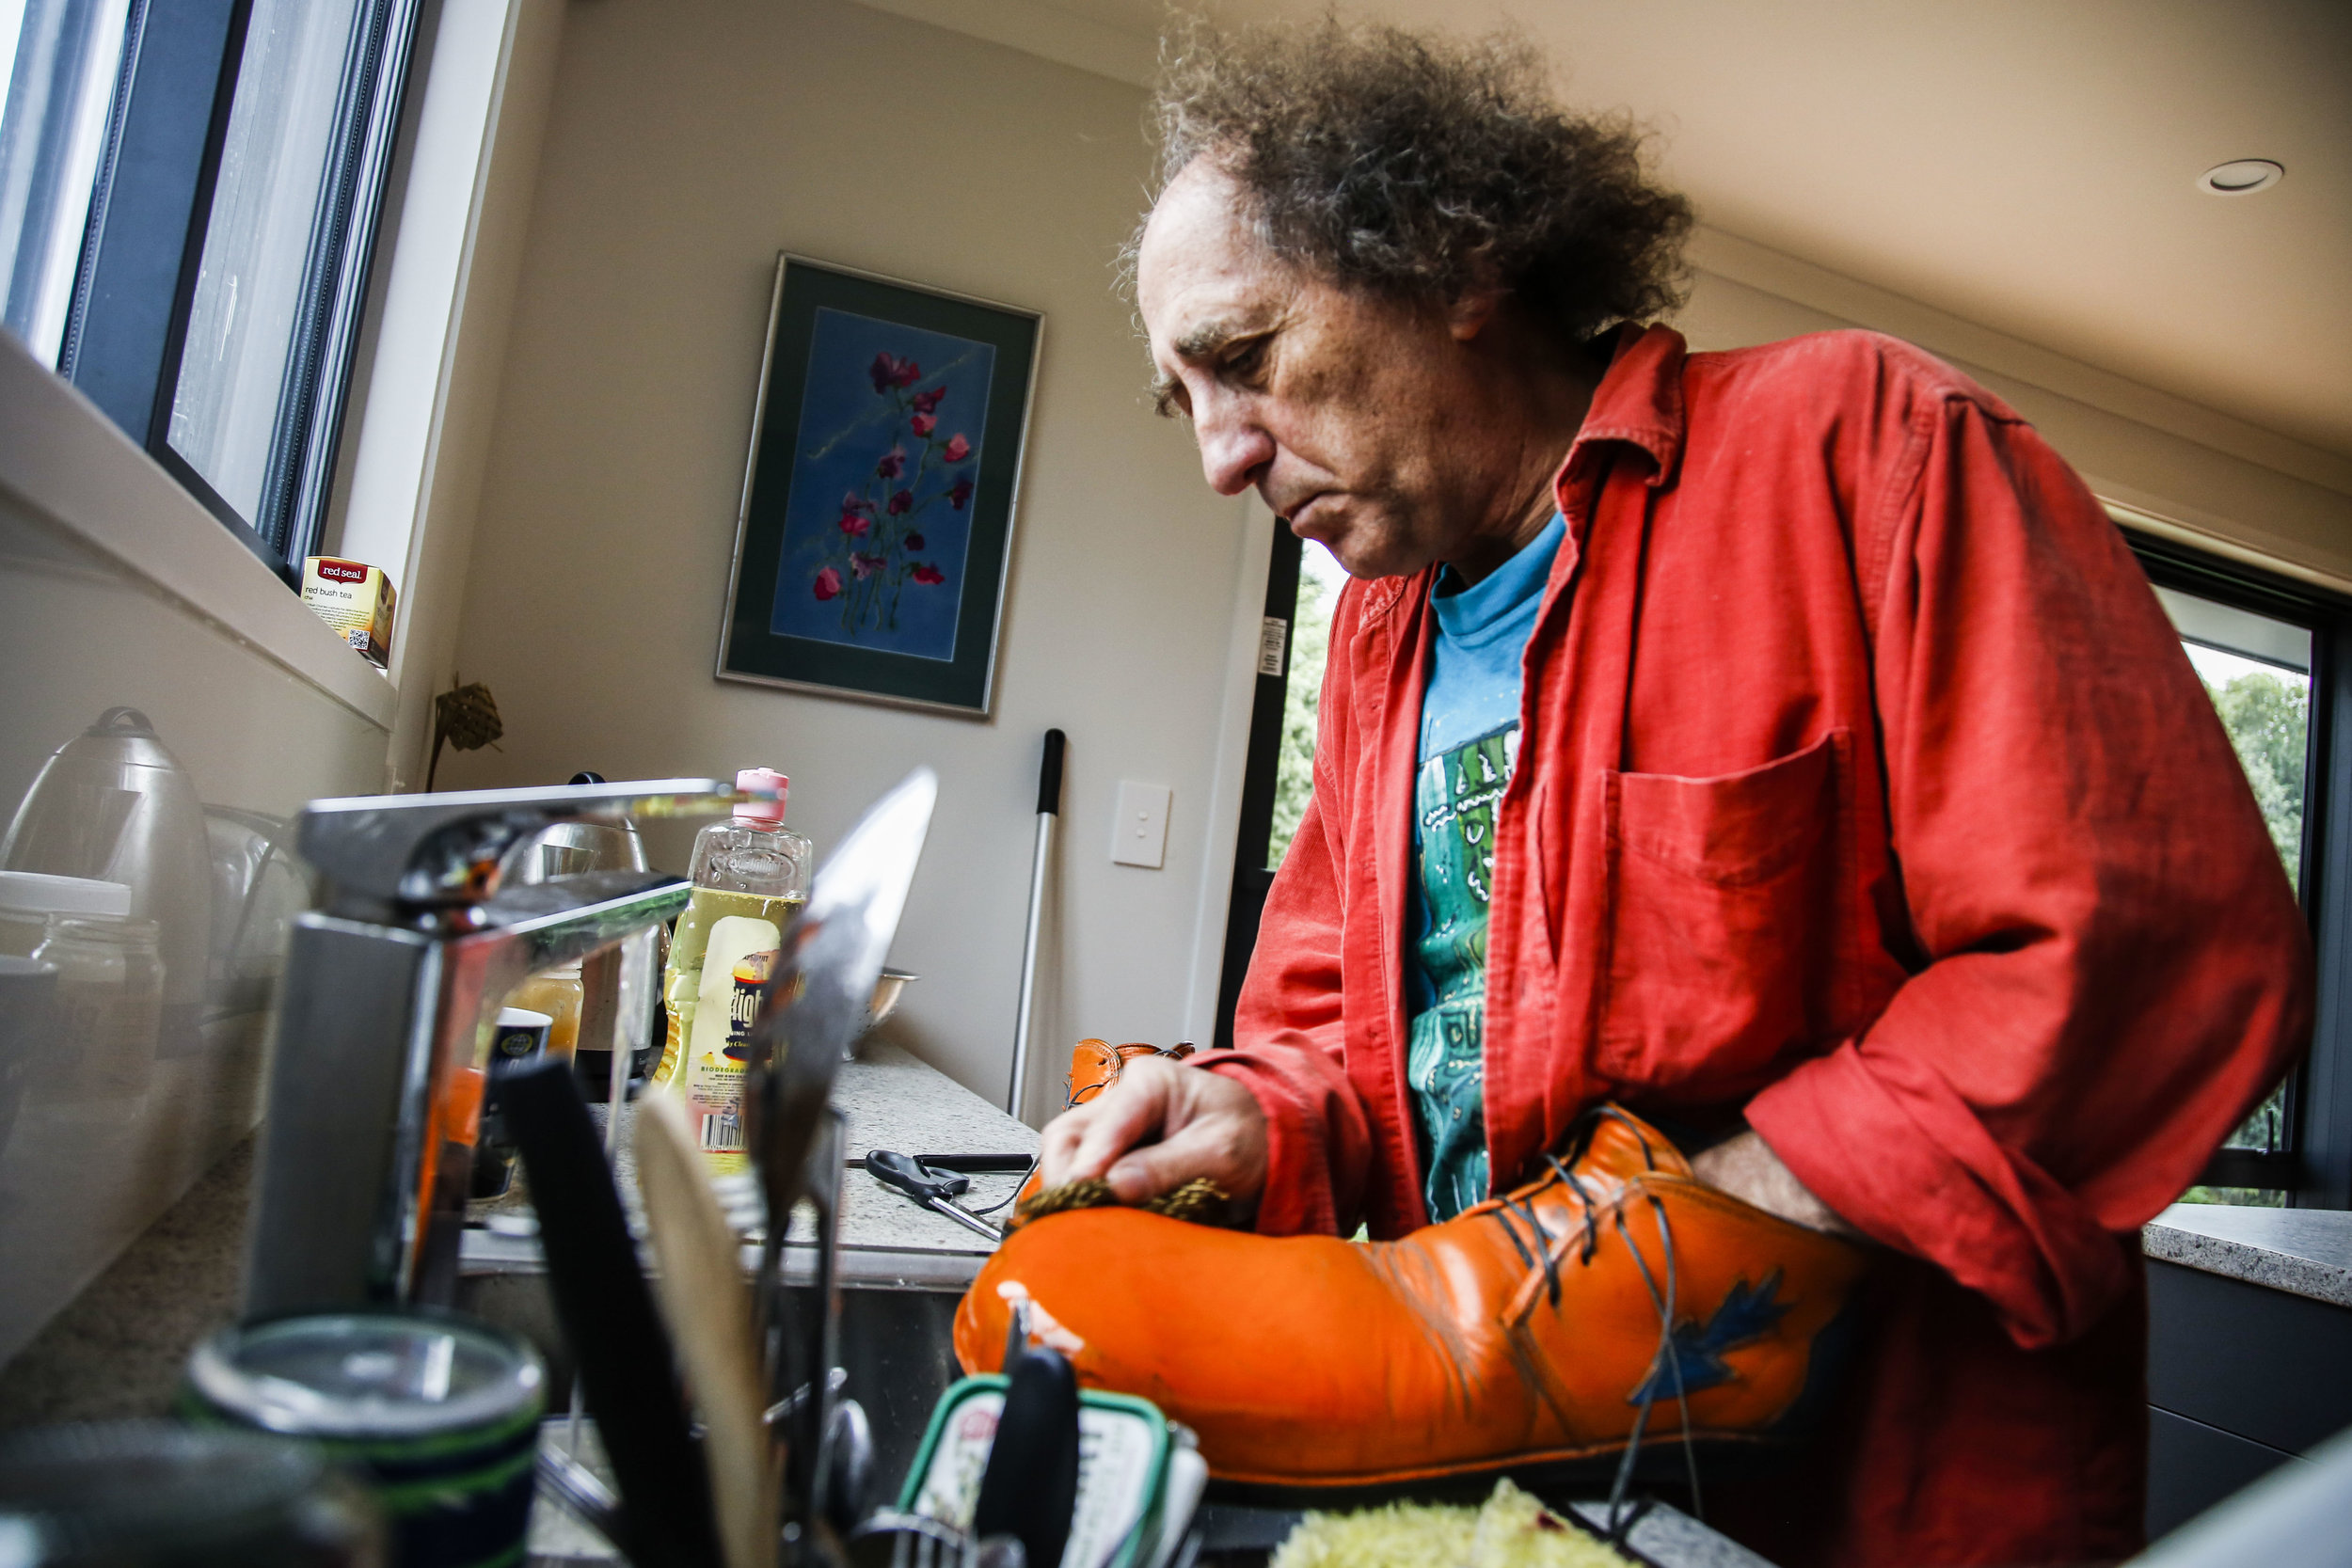  Chris Carrow washes his clown shoes in his Christchurch, NZ home on May 6, 2016 in preparation for his show with Wingfield at Rāwhiti School. "I guess clowning, in a way, is about truth. You have to be true to yourself and you have to be true to wha